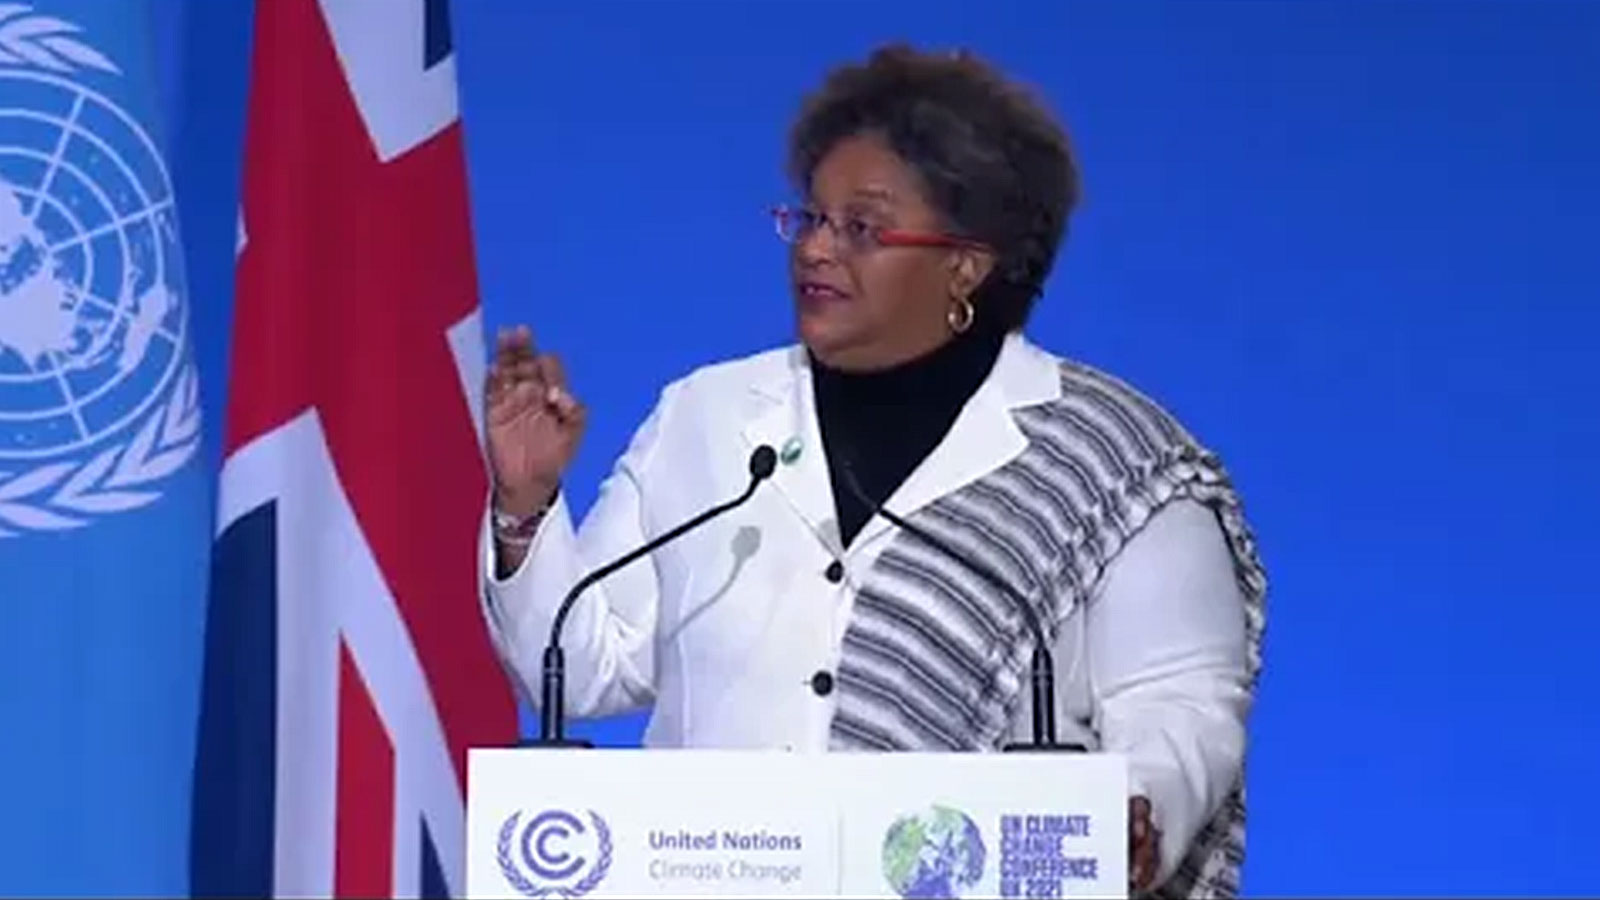 Barbados Prime Minister Mia Mottley addressing the COP26 World Leaders Conference on Climate Change